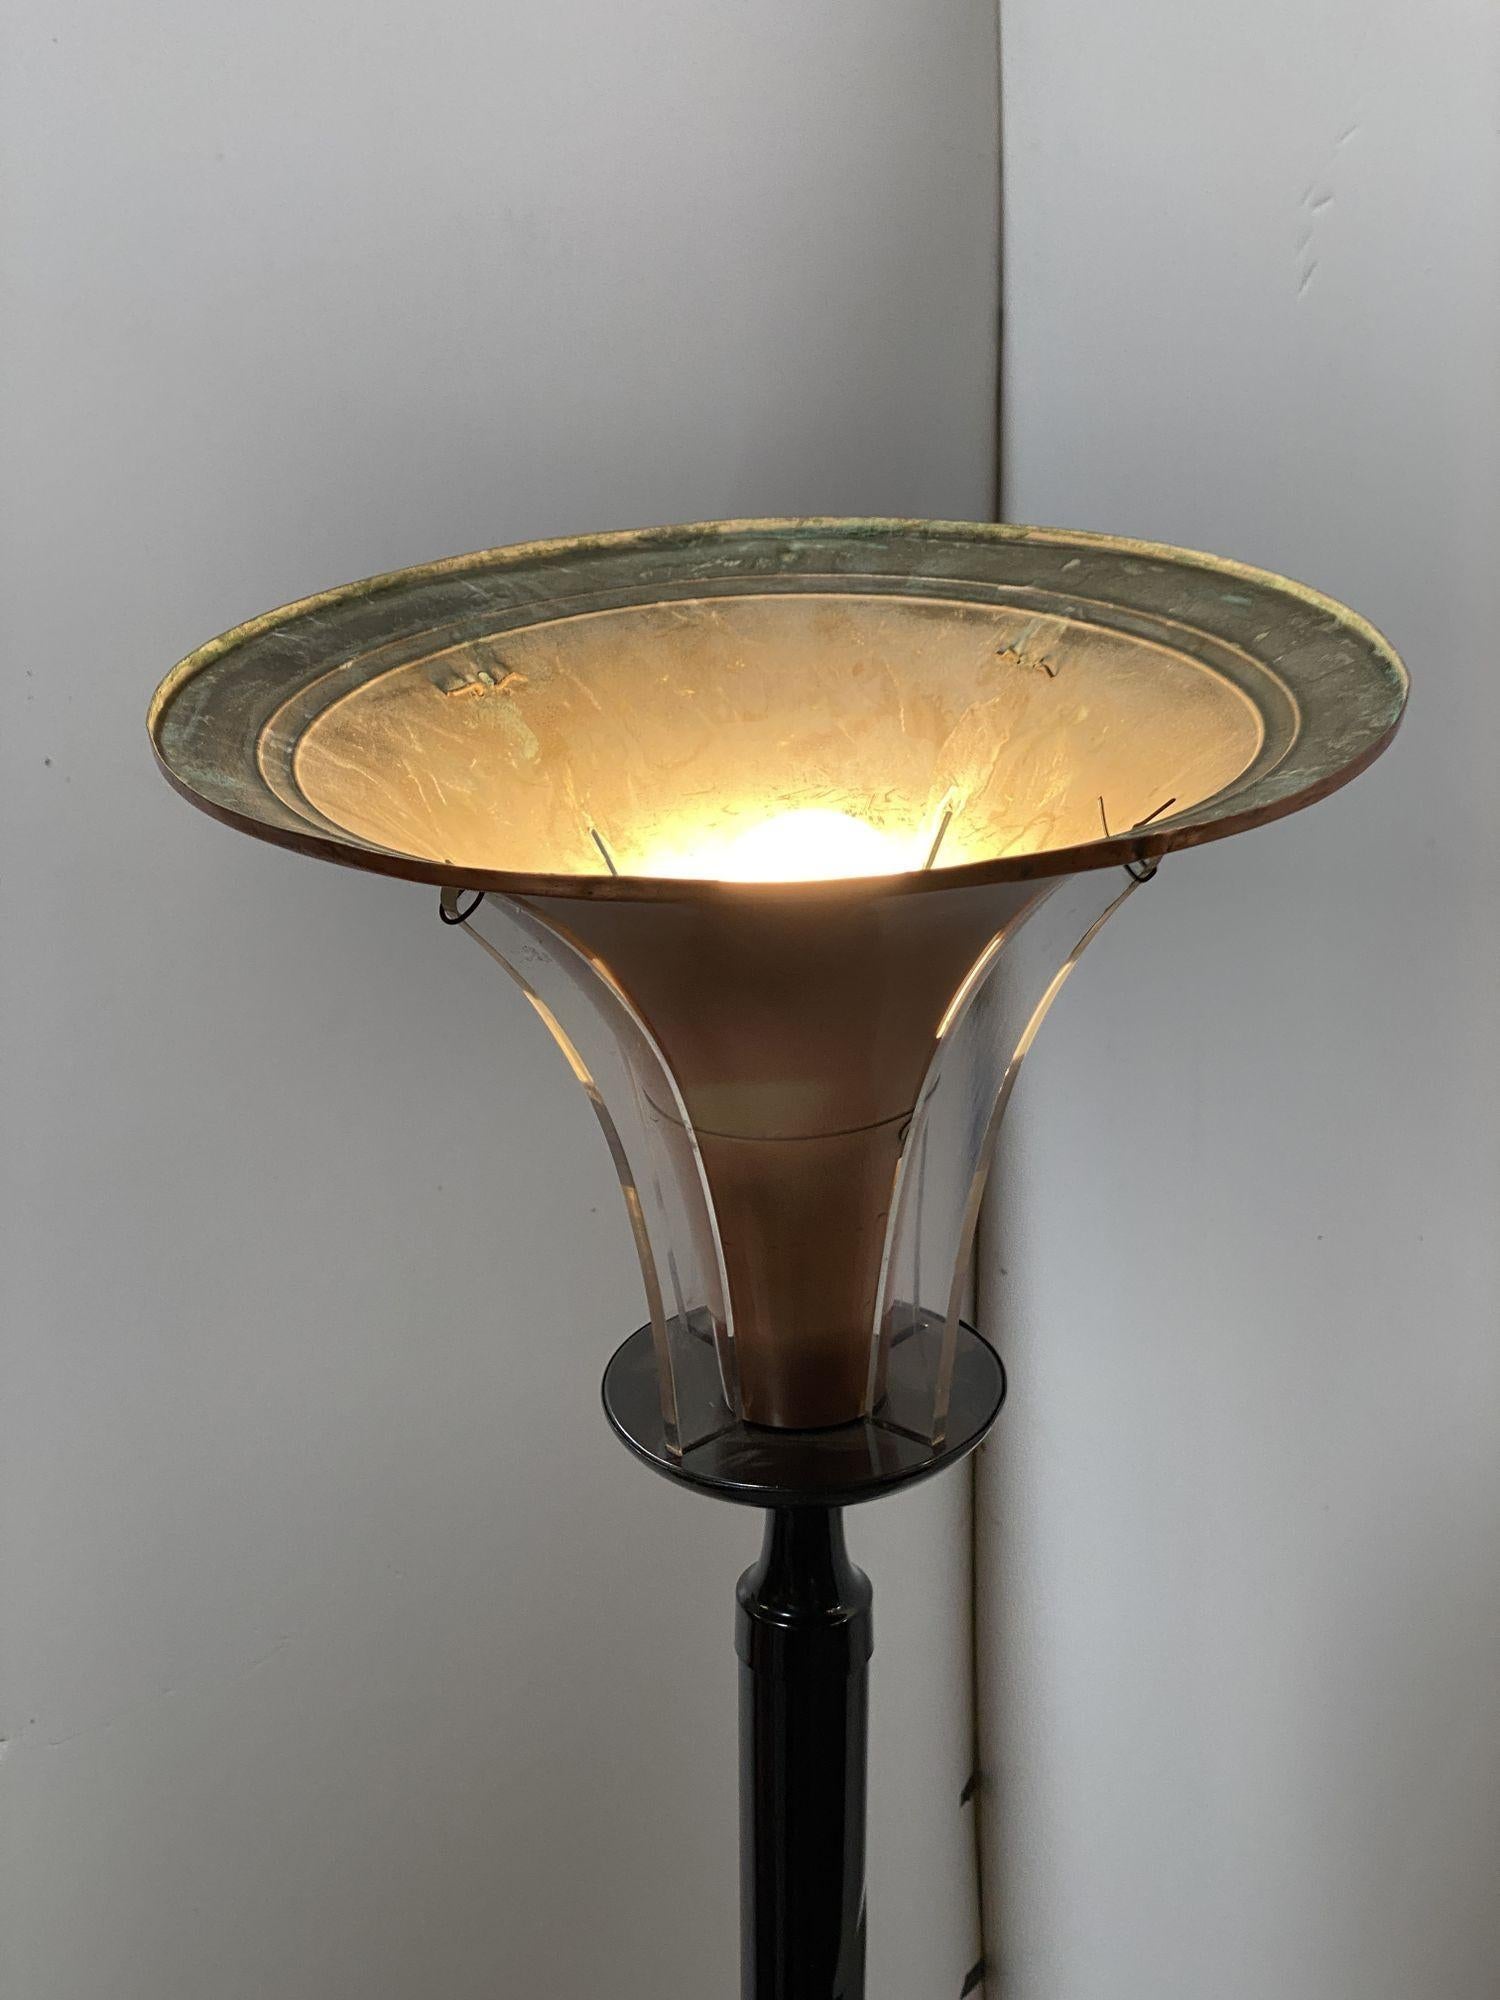 Mid-20th Century High Style Brass and Copper Art Deco Torchiere Floor Lamp w/ Acrylic Accents For Sale